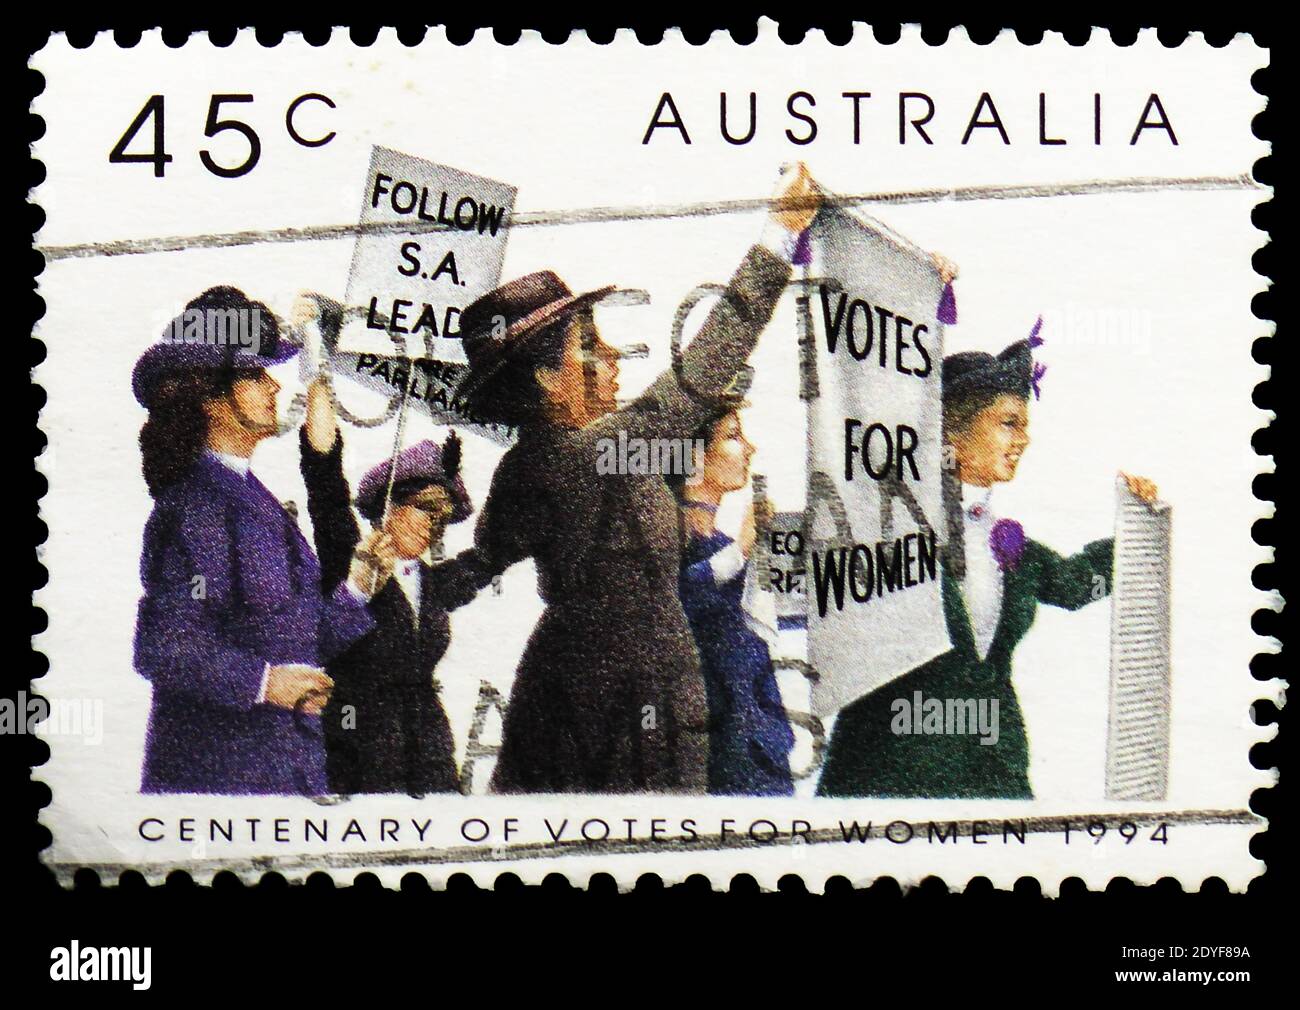 MOSCOW, RUSSIA - MARCH 23, 2019: A stamp printed in Australia shows Suffragettes, Centenary of Women's Suffrage in Australia serie, circa 1994 Stock Photo